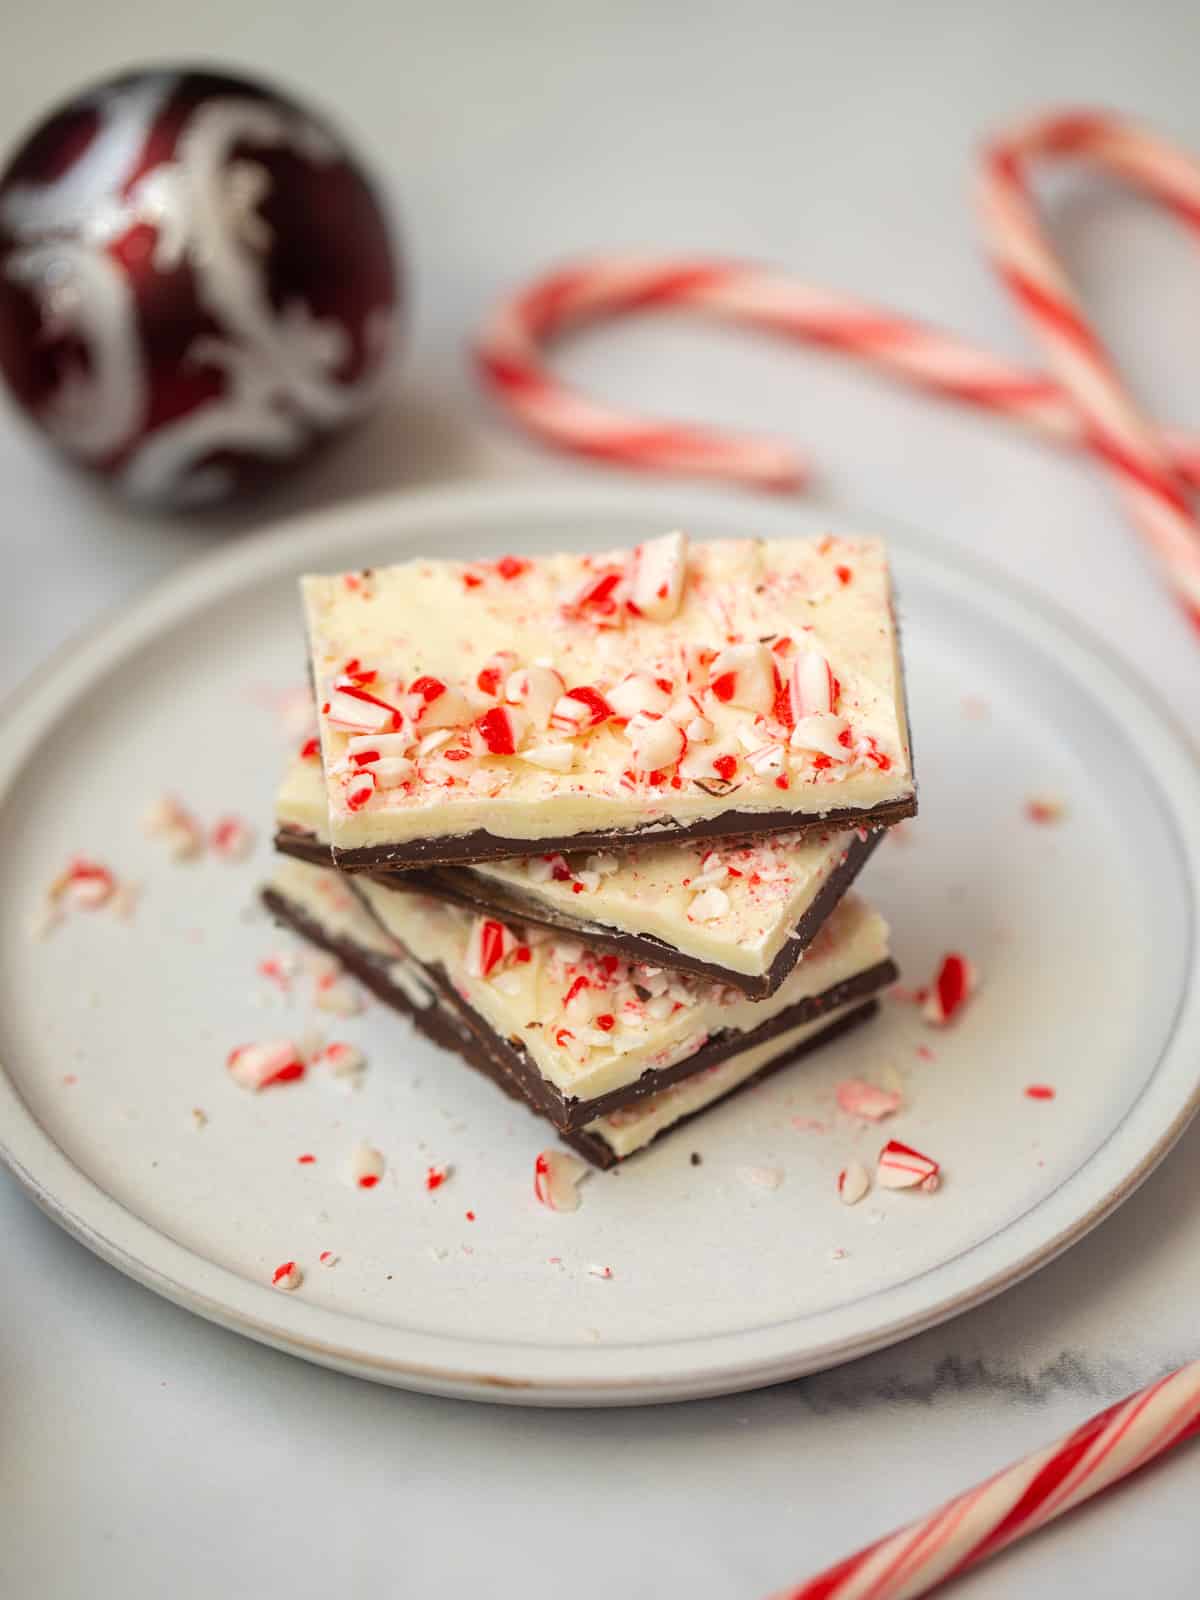 Peppermint Bark on plate stack up with candy canes in background.